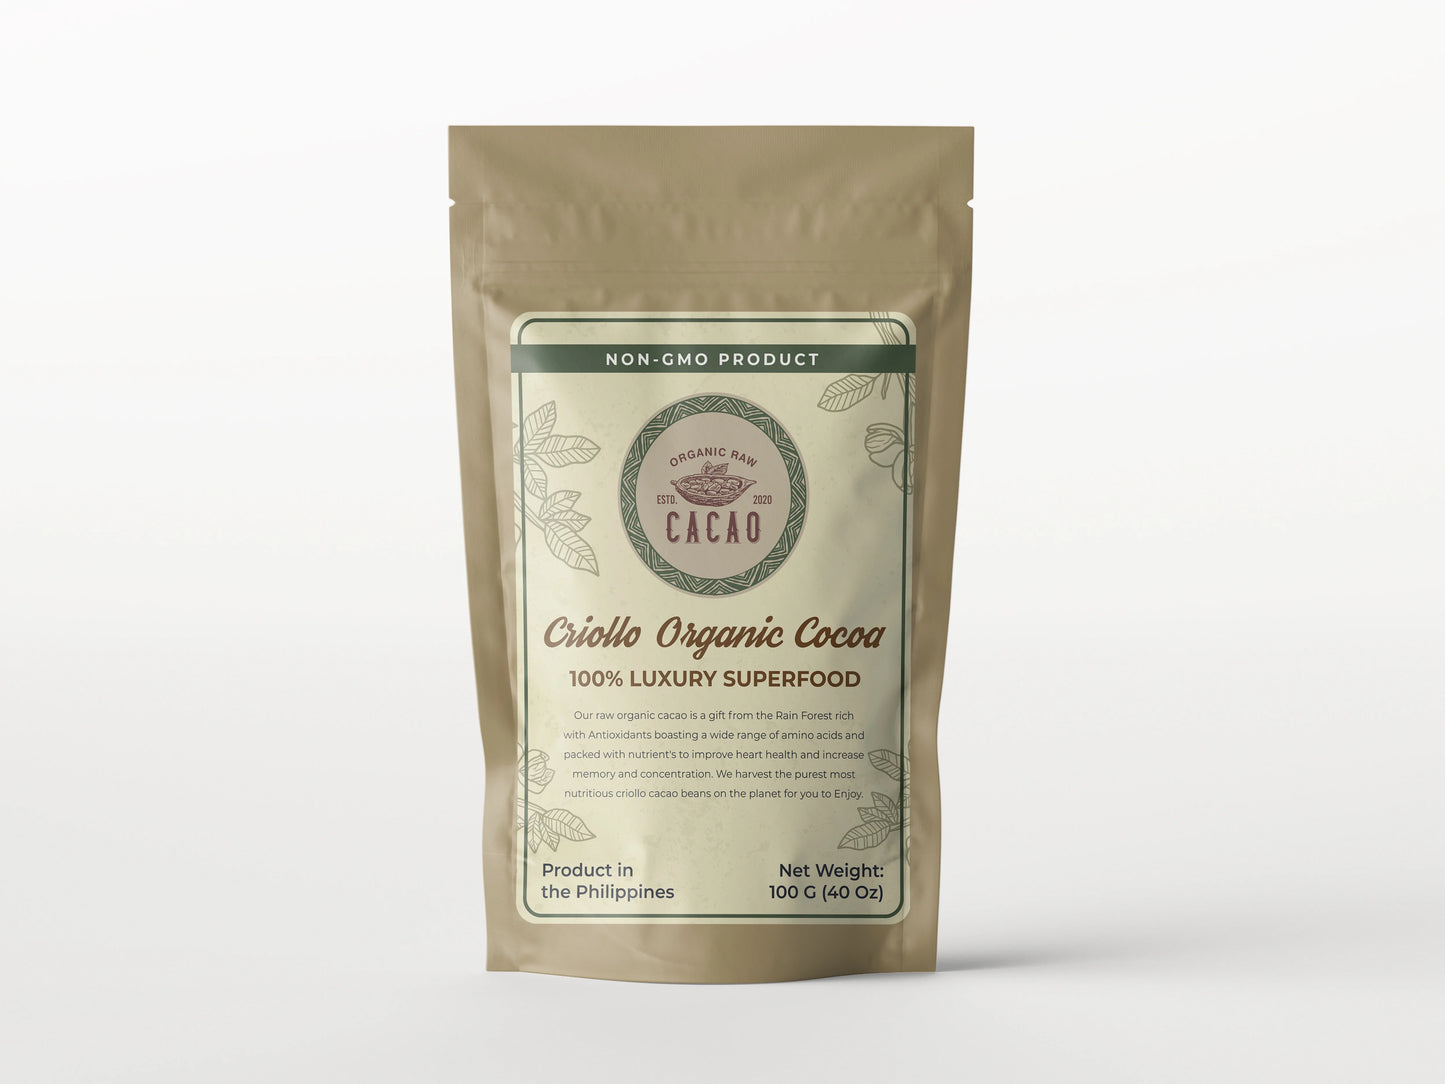 Stone-Ground Criollo Cacao Power. Crafted using ancient techniques that honor the essence of the cacao bean